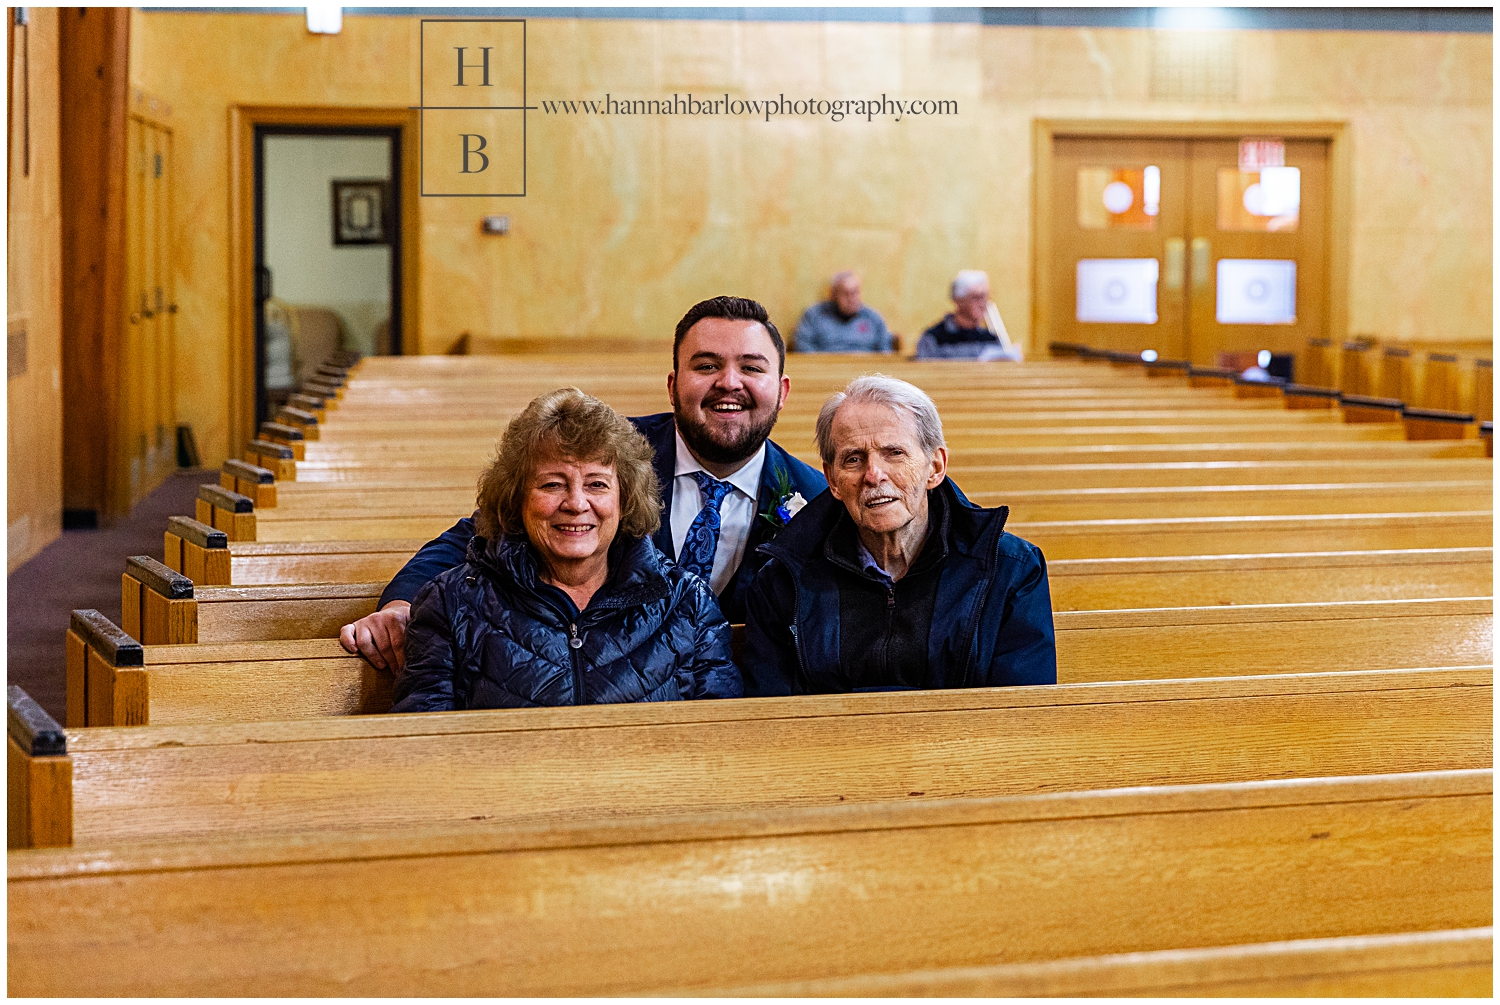 Groom poses with older couple in church.